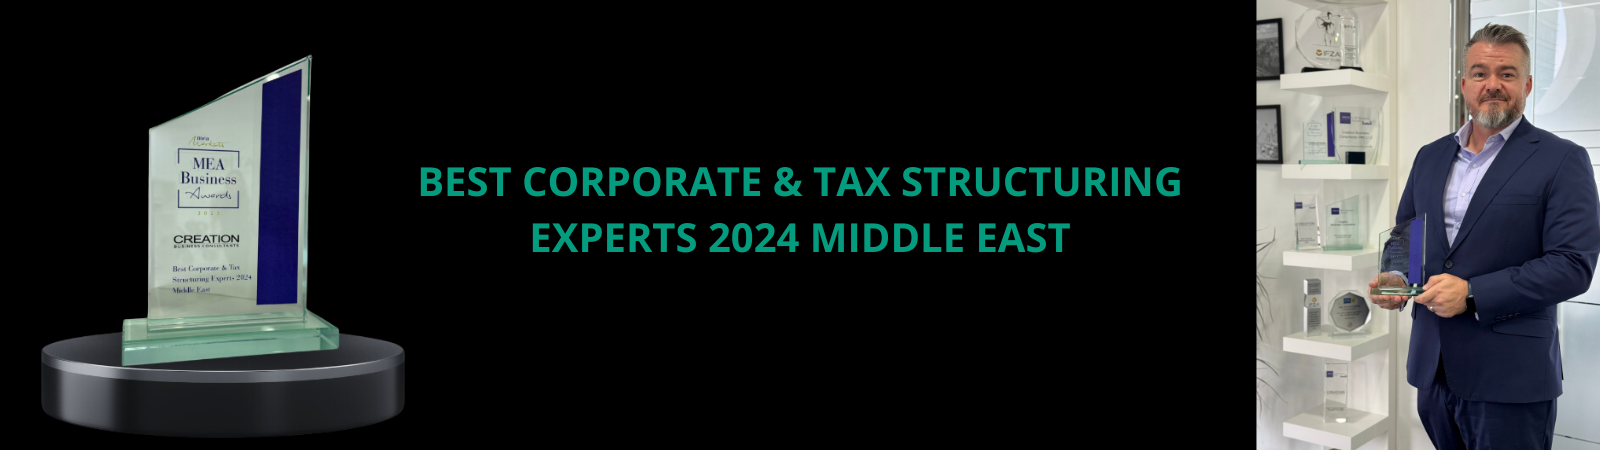 Creation Business Consultants Wins Best Corporate & Tax Structuring Experts 2024 Middle East Award